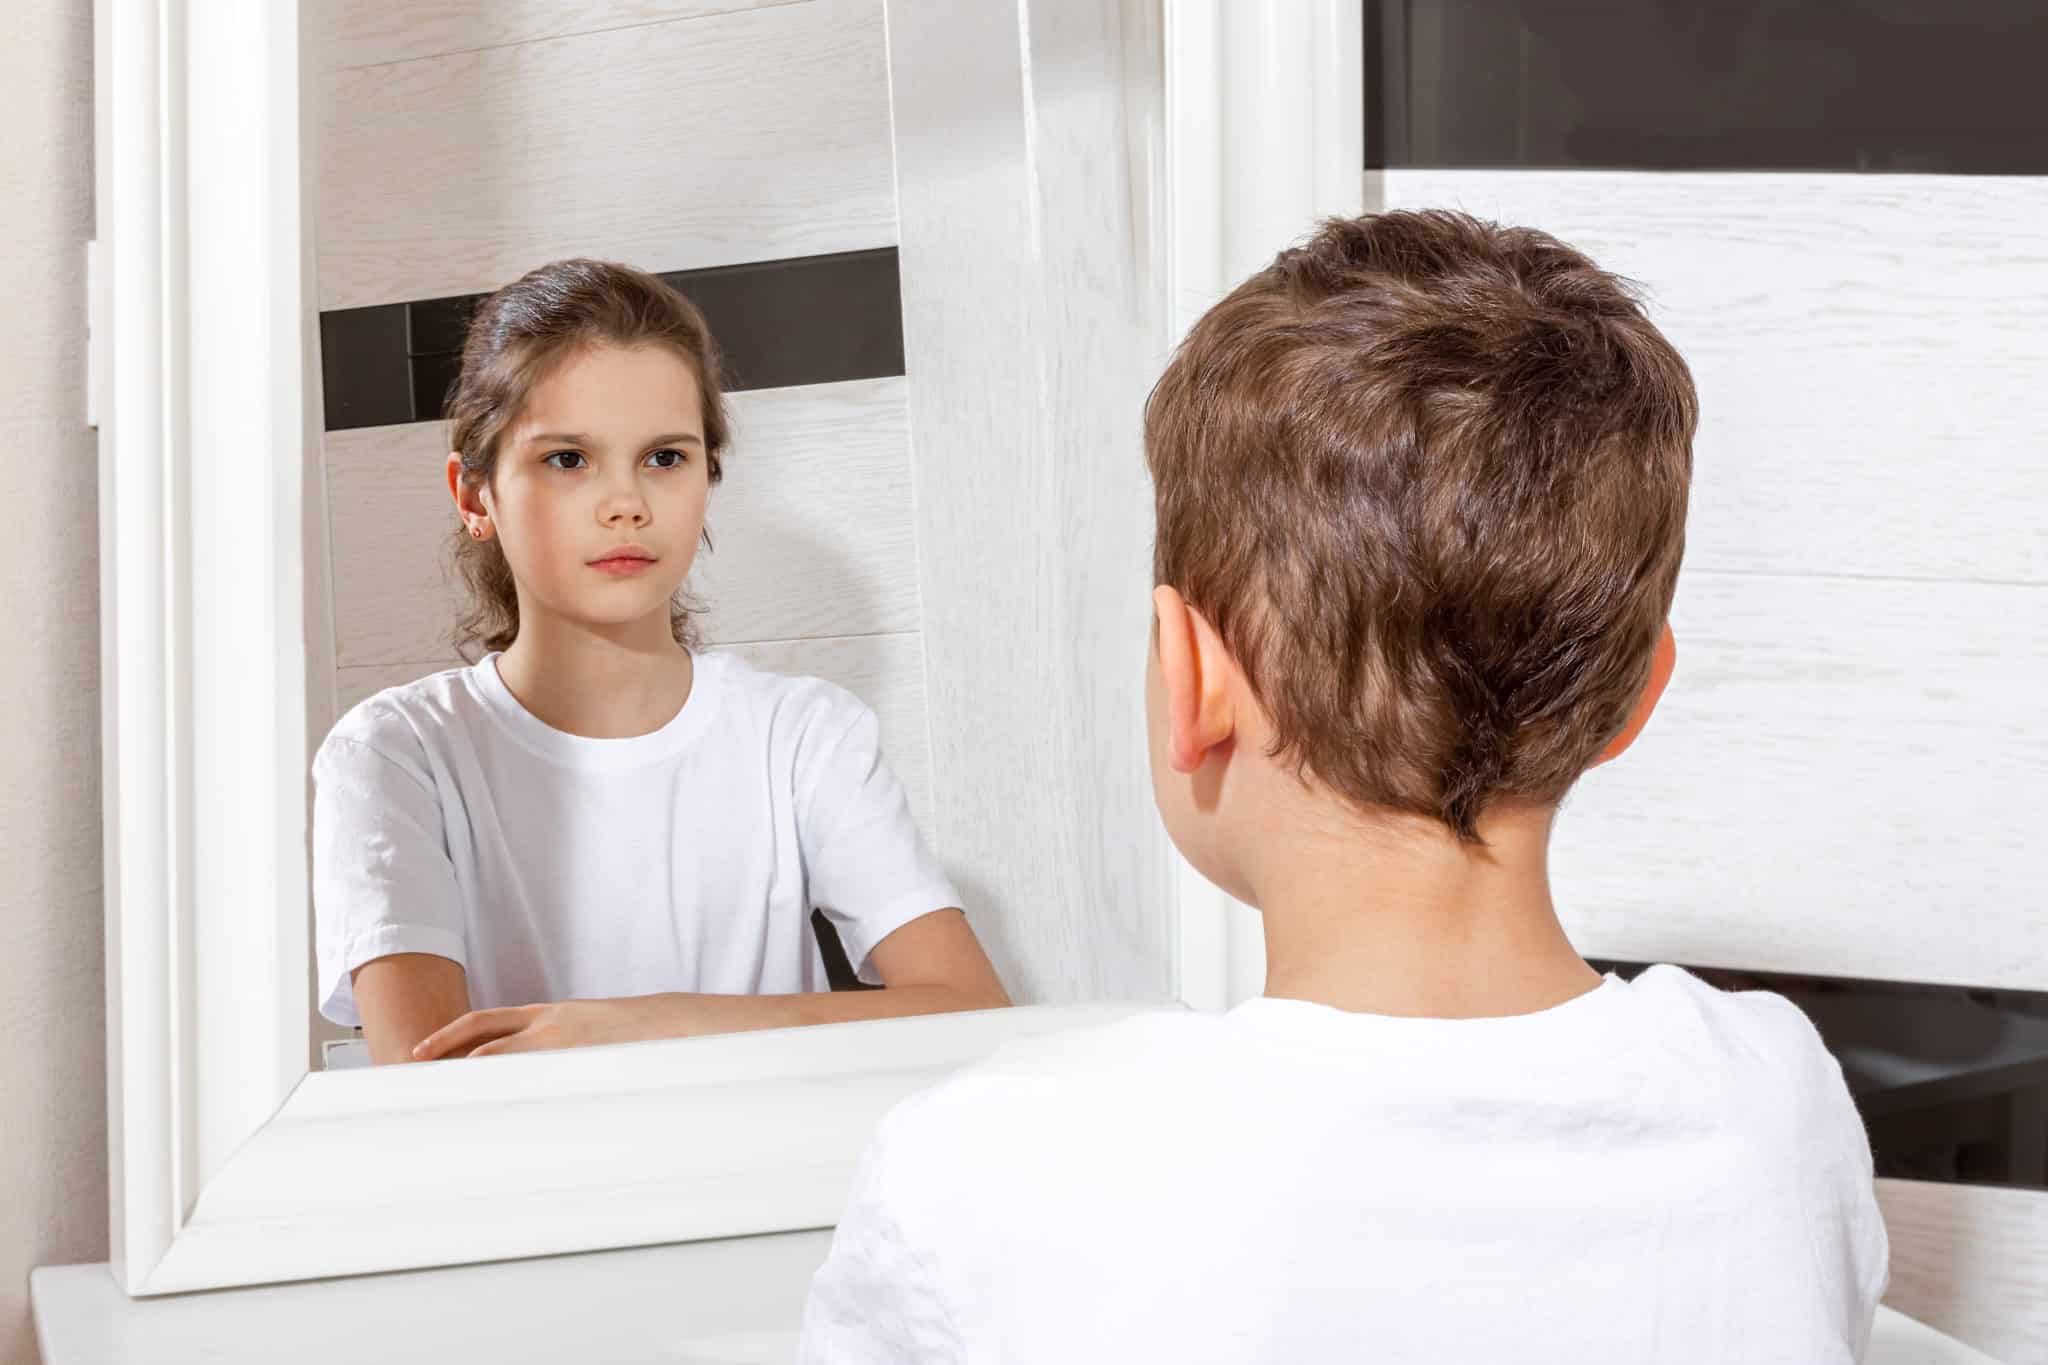 boy seeing a reflection of a girl in the mirror, concept of gender dysphoria